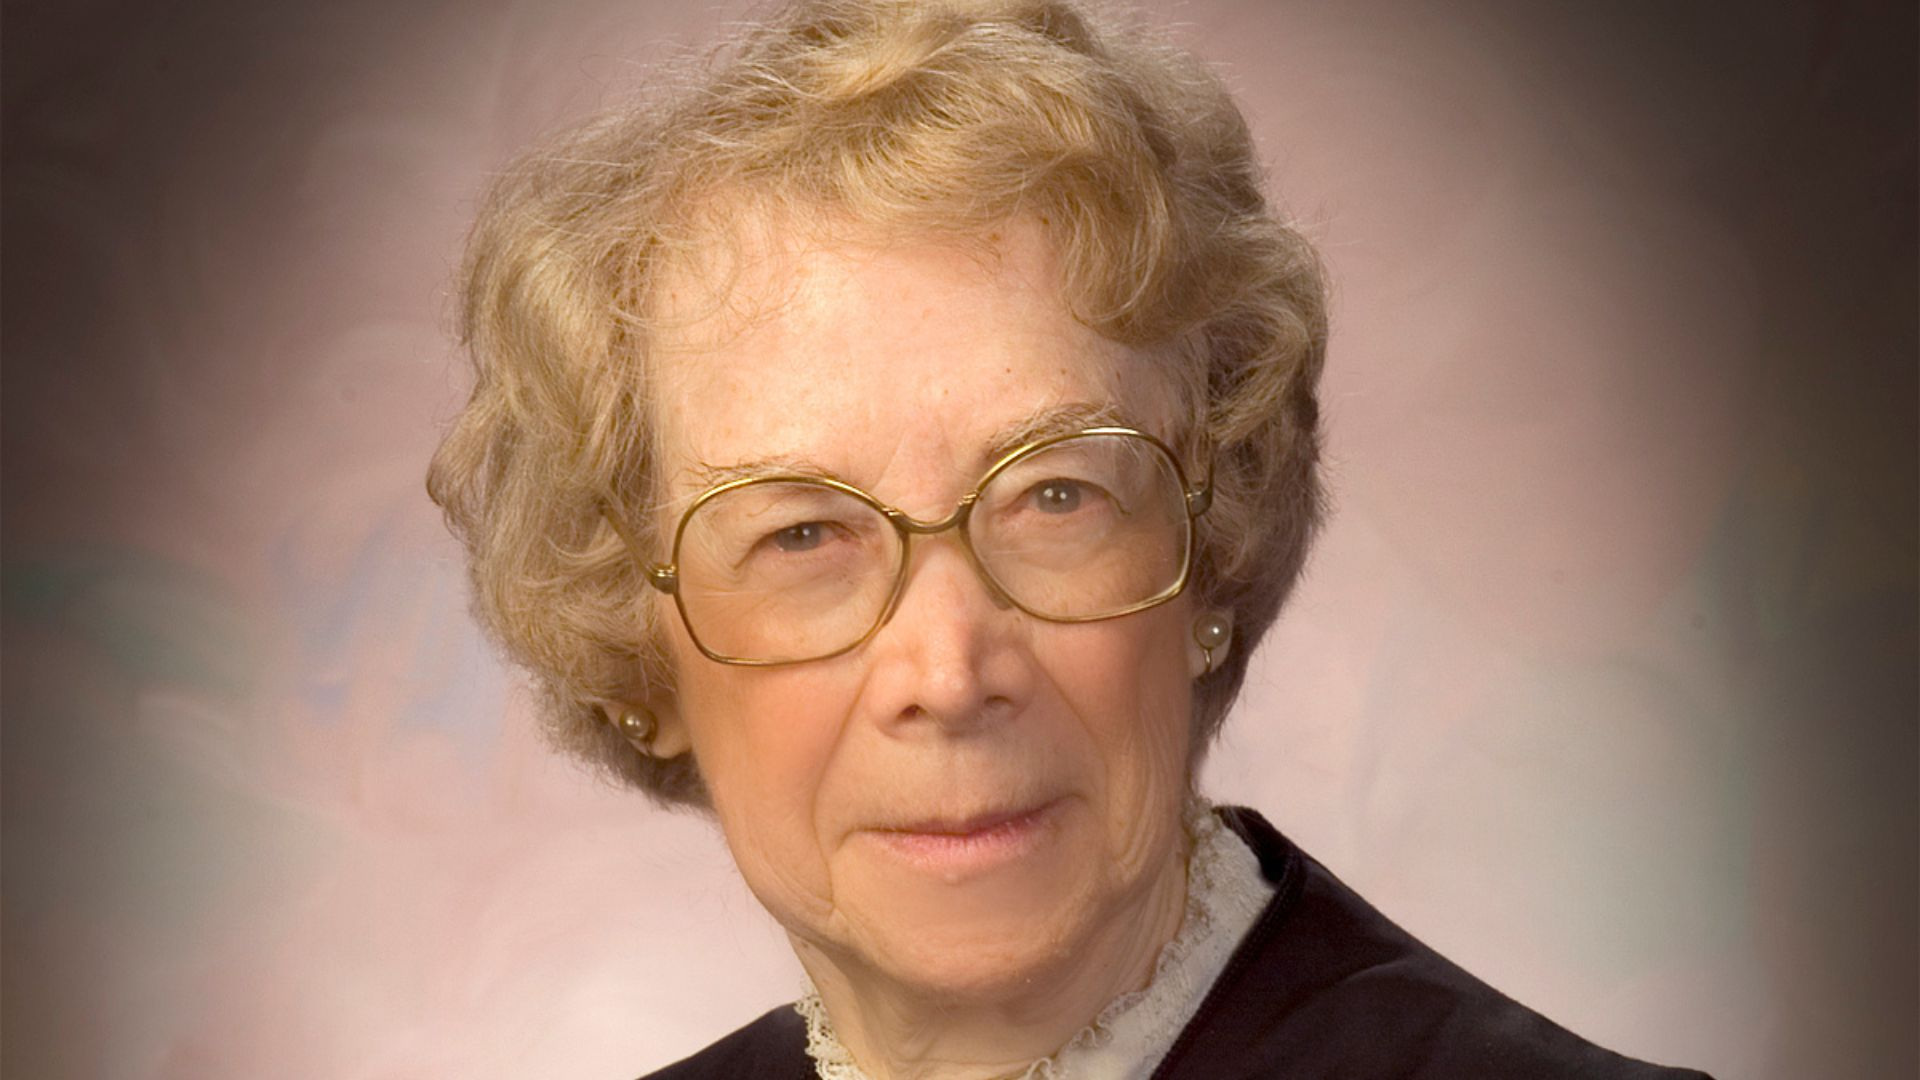 U.S. Circuit Judge Pauline Newman of the U.S. Court of Appeals for the Federal Circuit